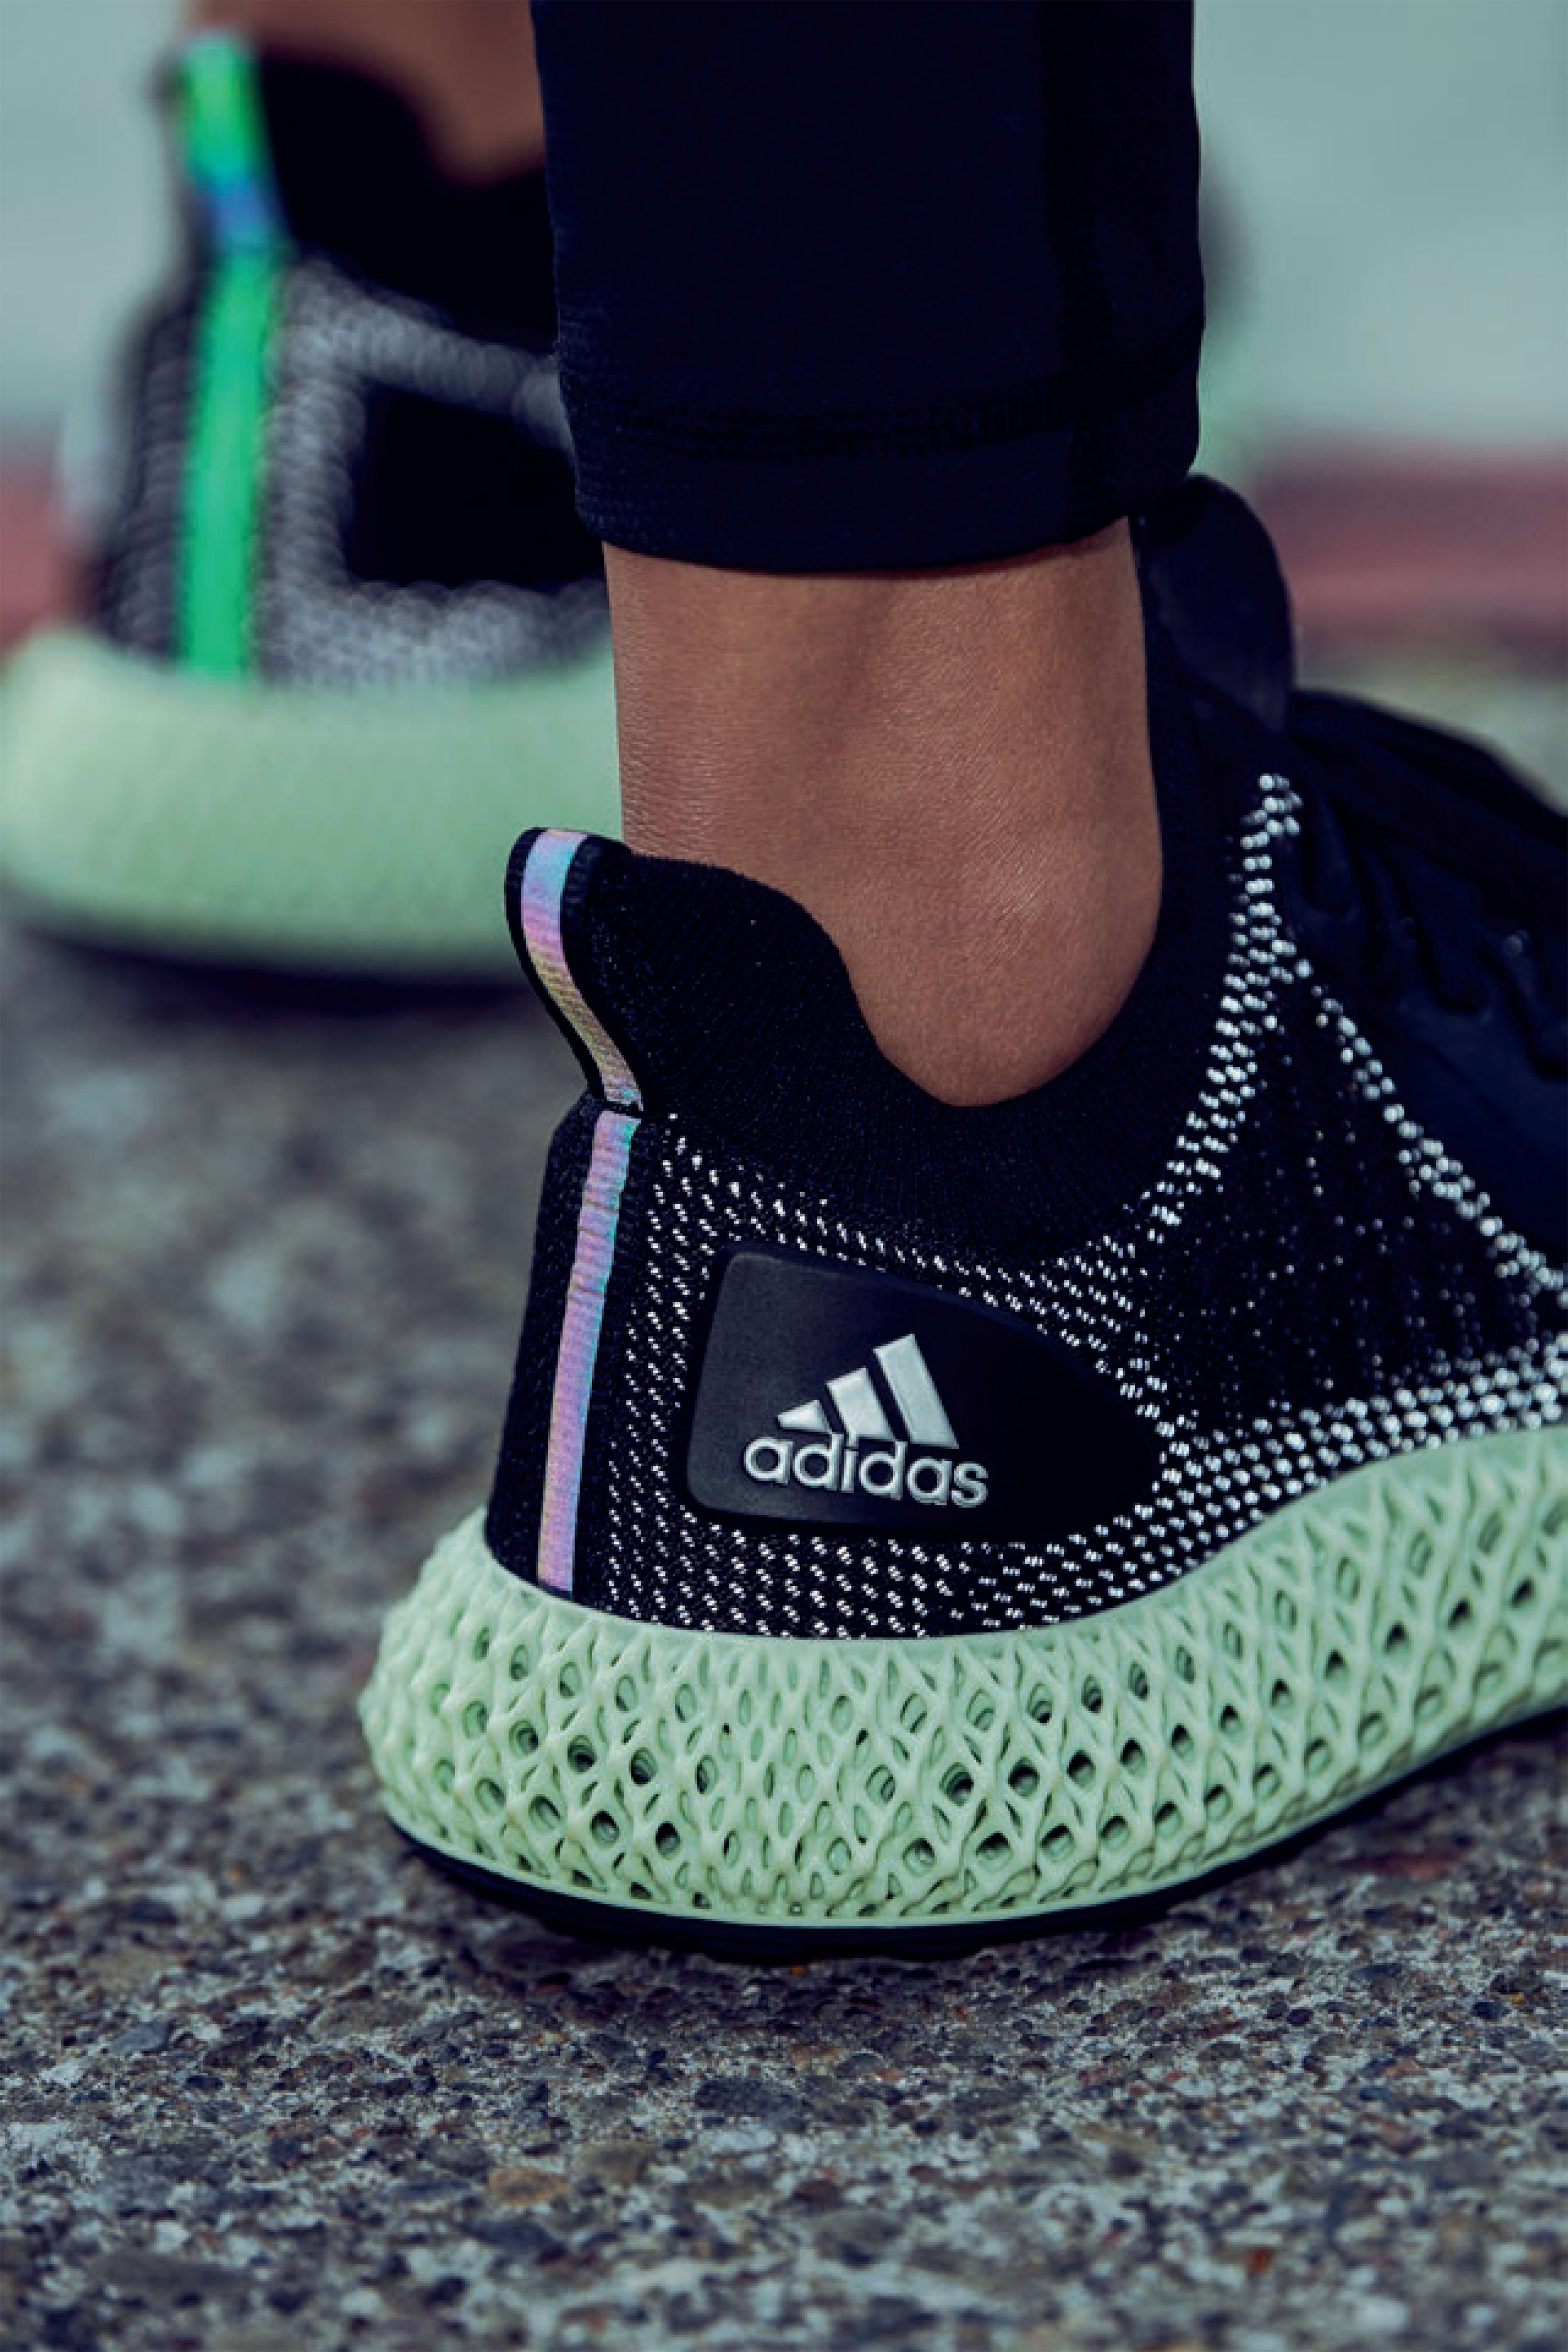 adidas Light up the Streets with the Reflective ALPHAEDGE 4D Sneaker